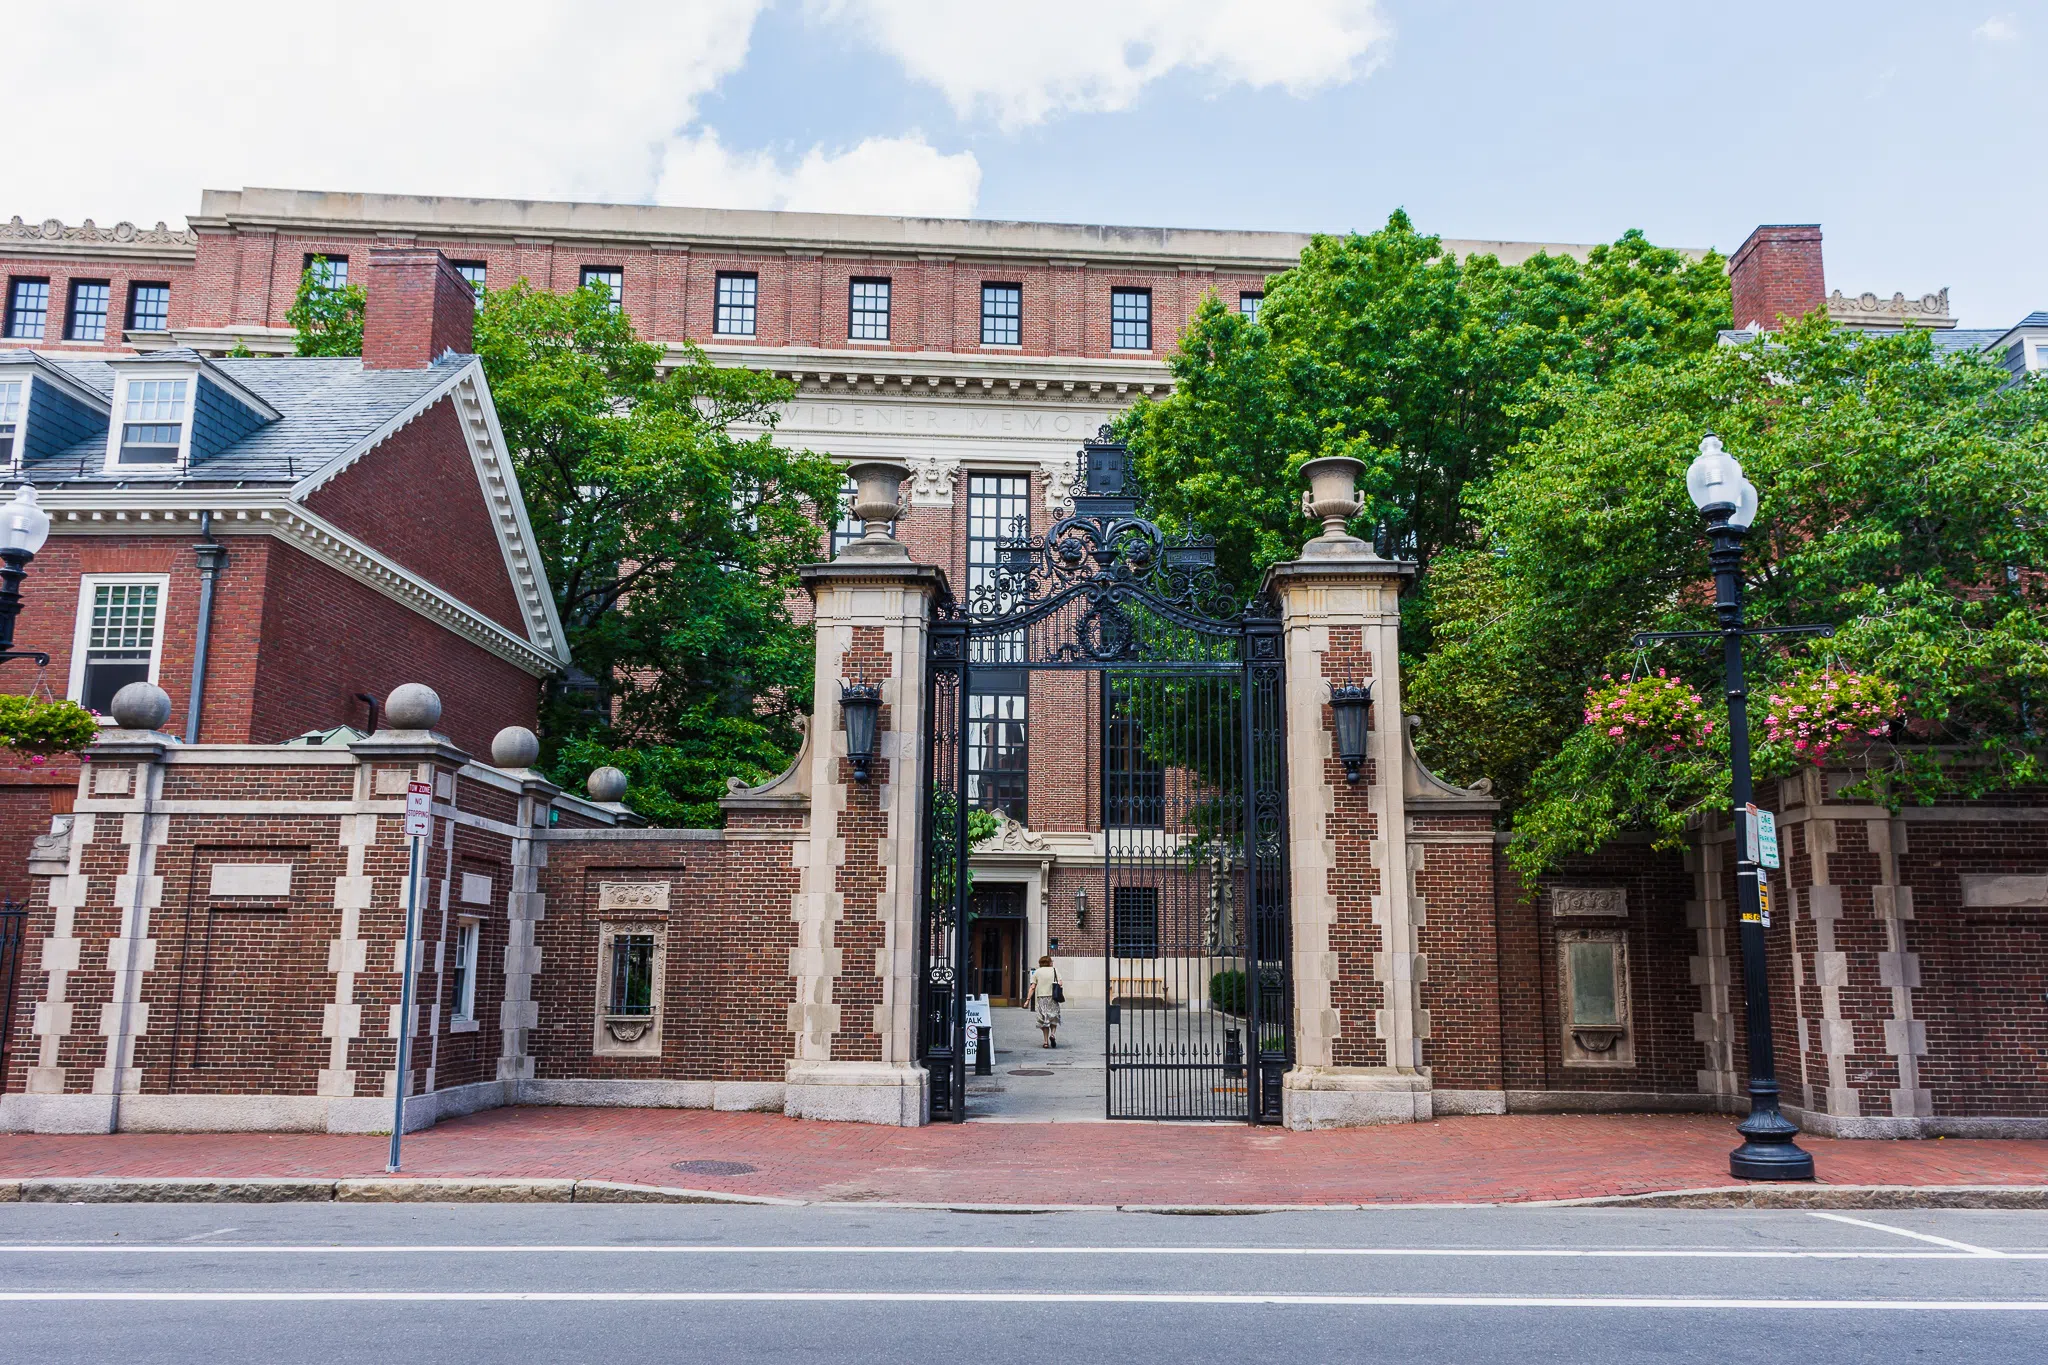 Red brick wall and iron gate gives entrance to Harvard Yard; large building inside gates